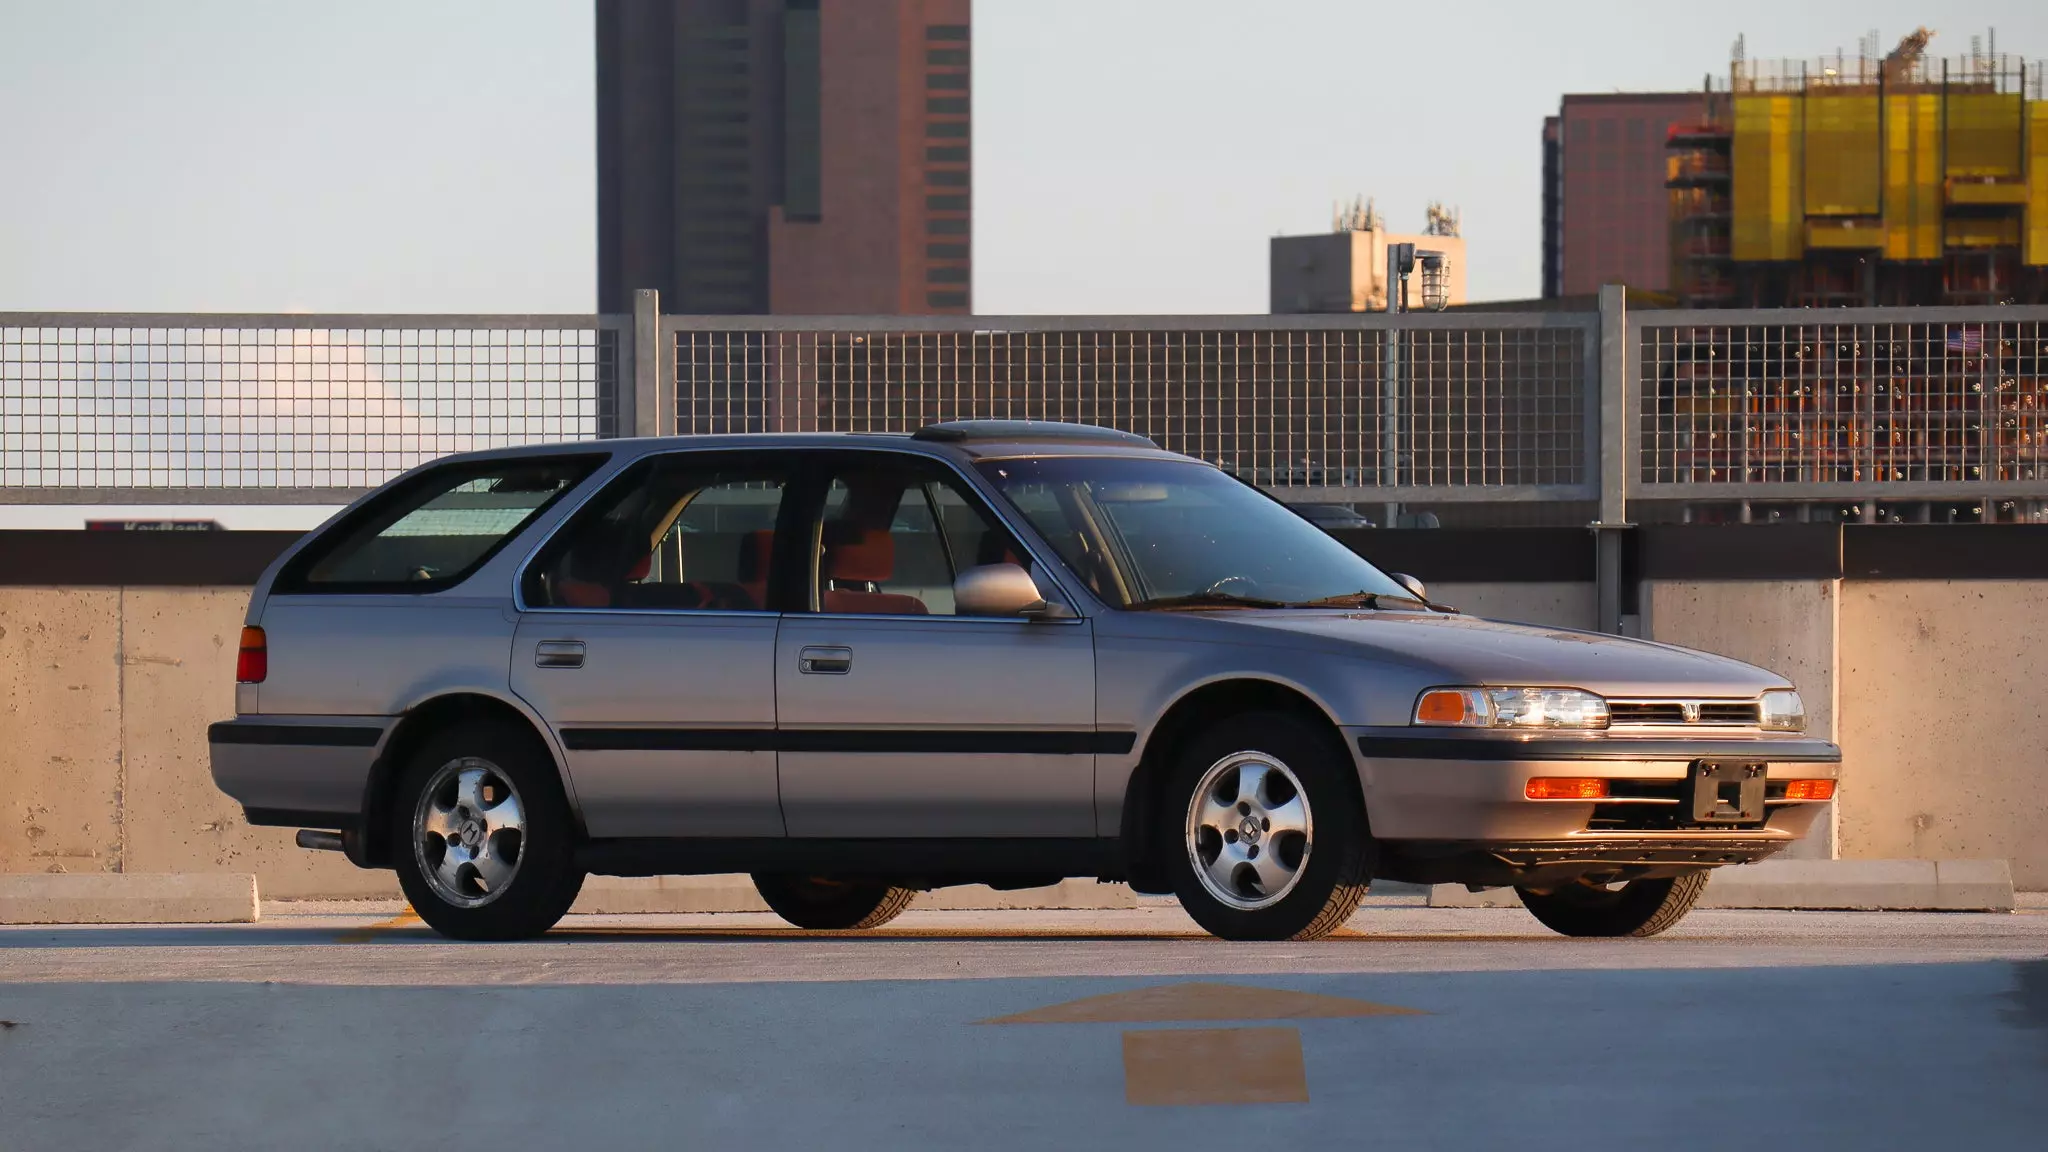 I Really Wanted To Love My 1993 Honda Accord Wagon But Just Couldn’t | Autance